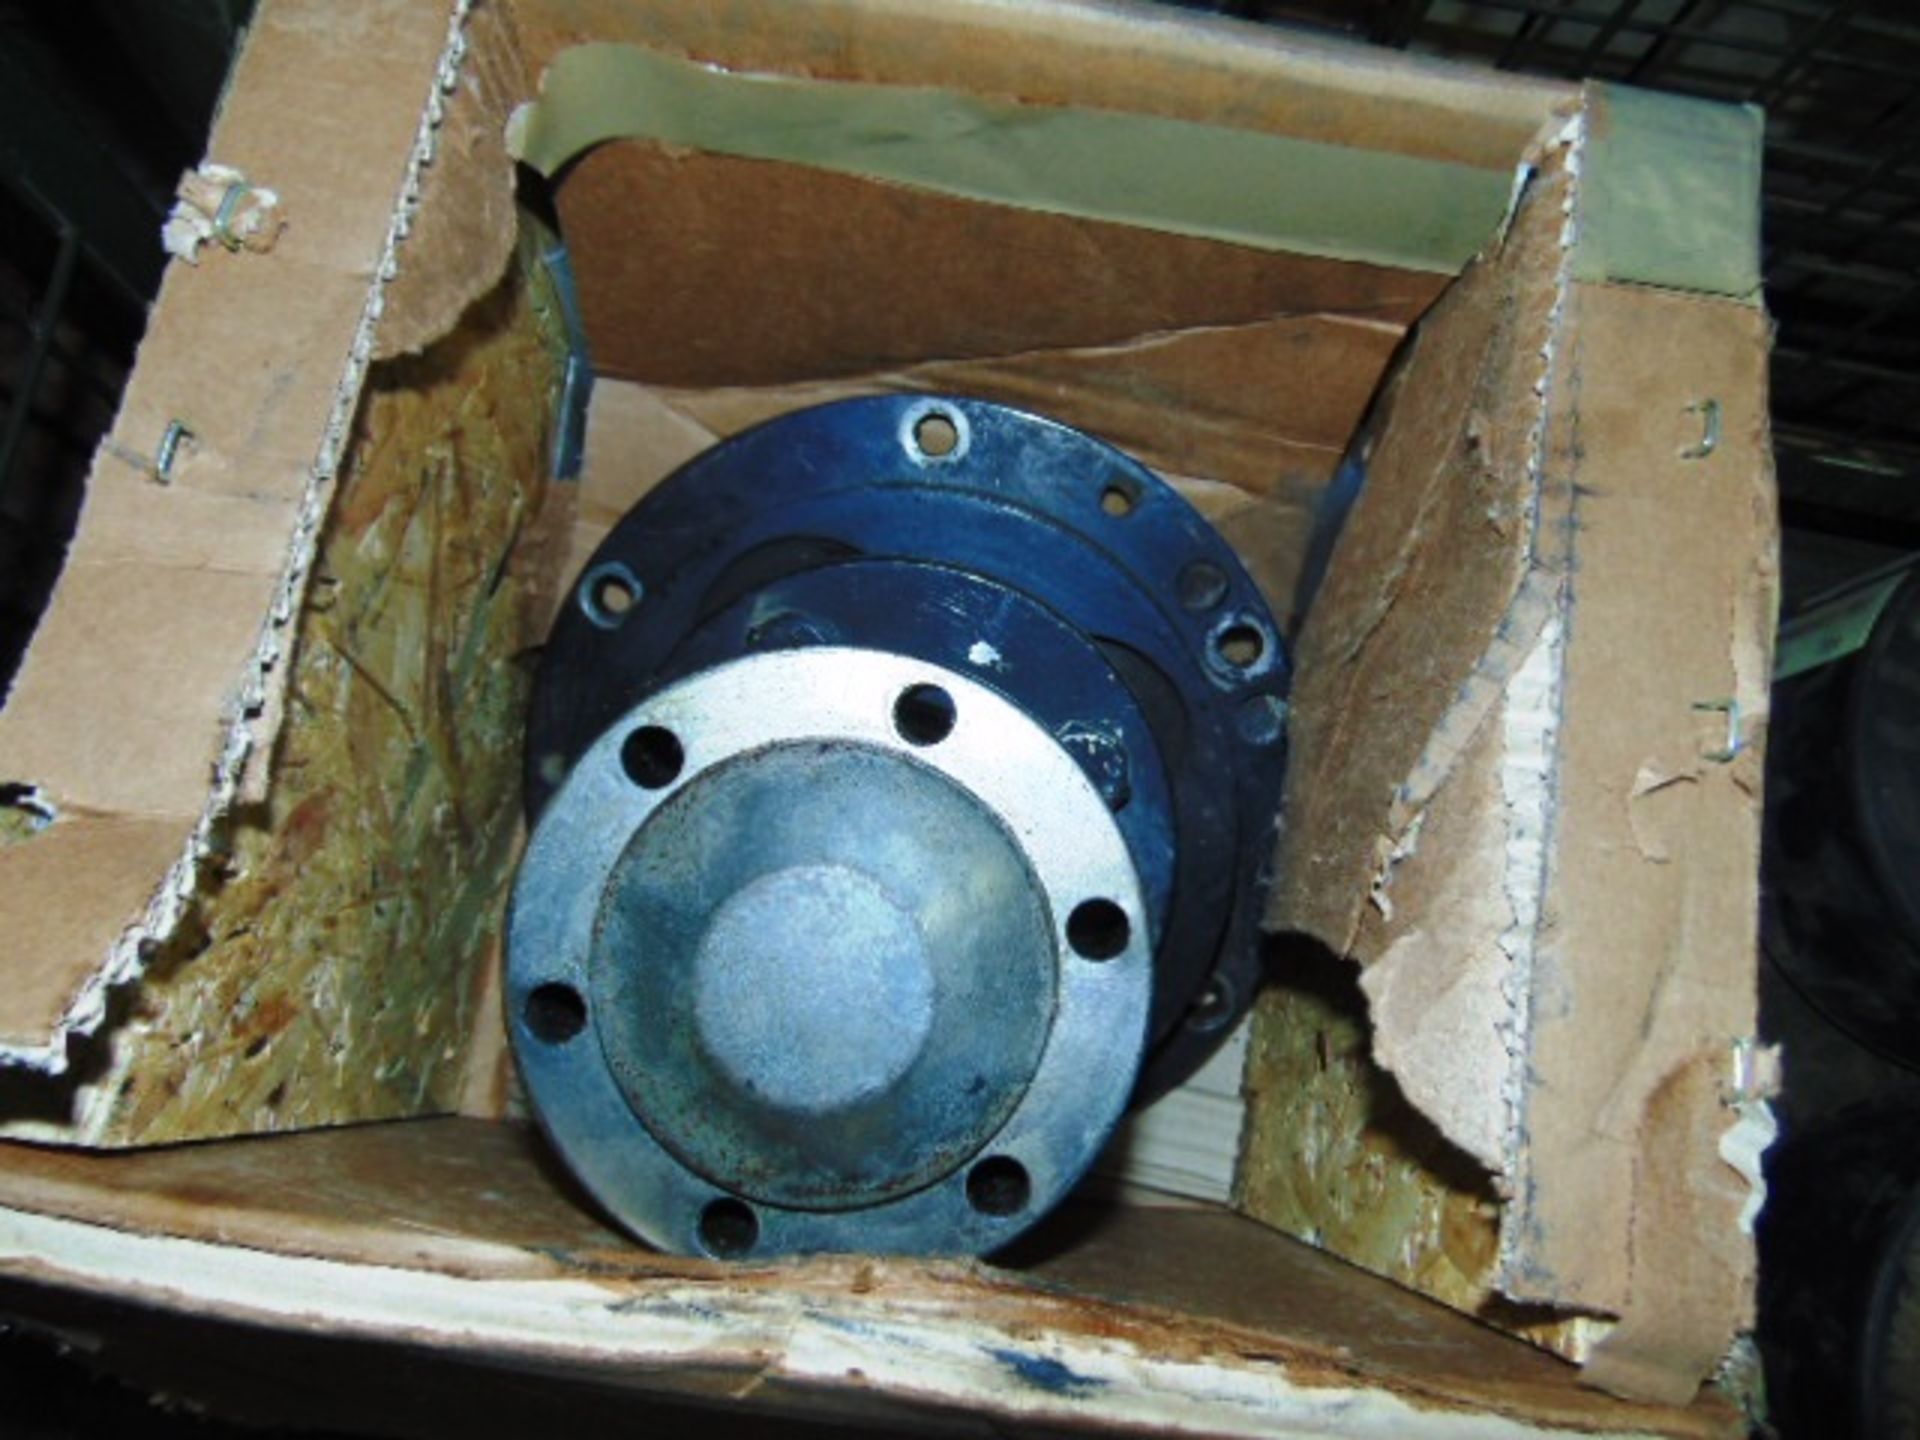 Mixed Stillage of CVRT, Warrior and FV Parts consisting of Wheels, Pumps, Shock Absorbers etc - Image 5 of 7